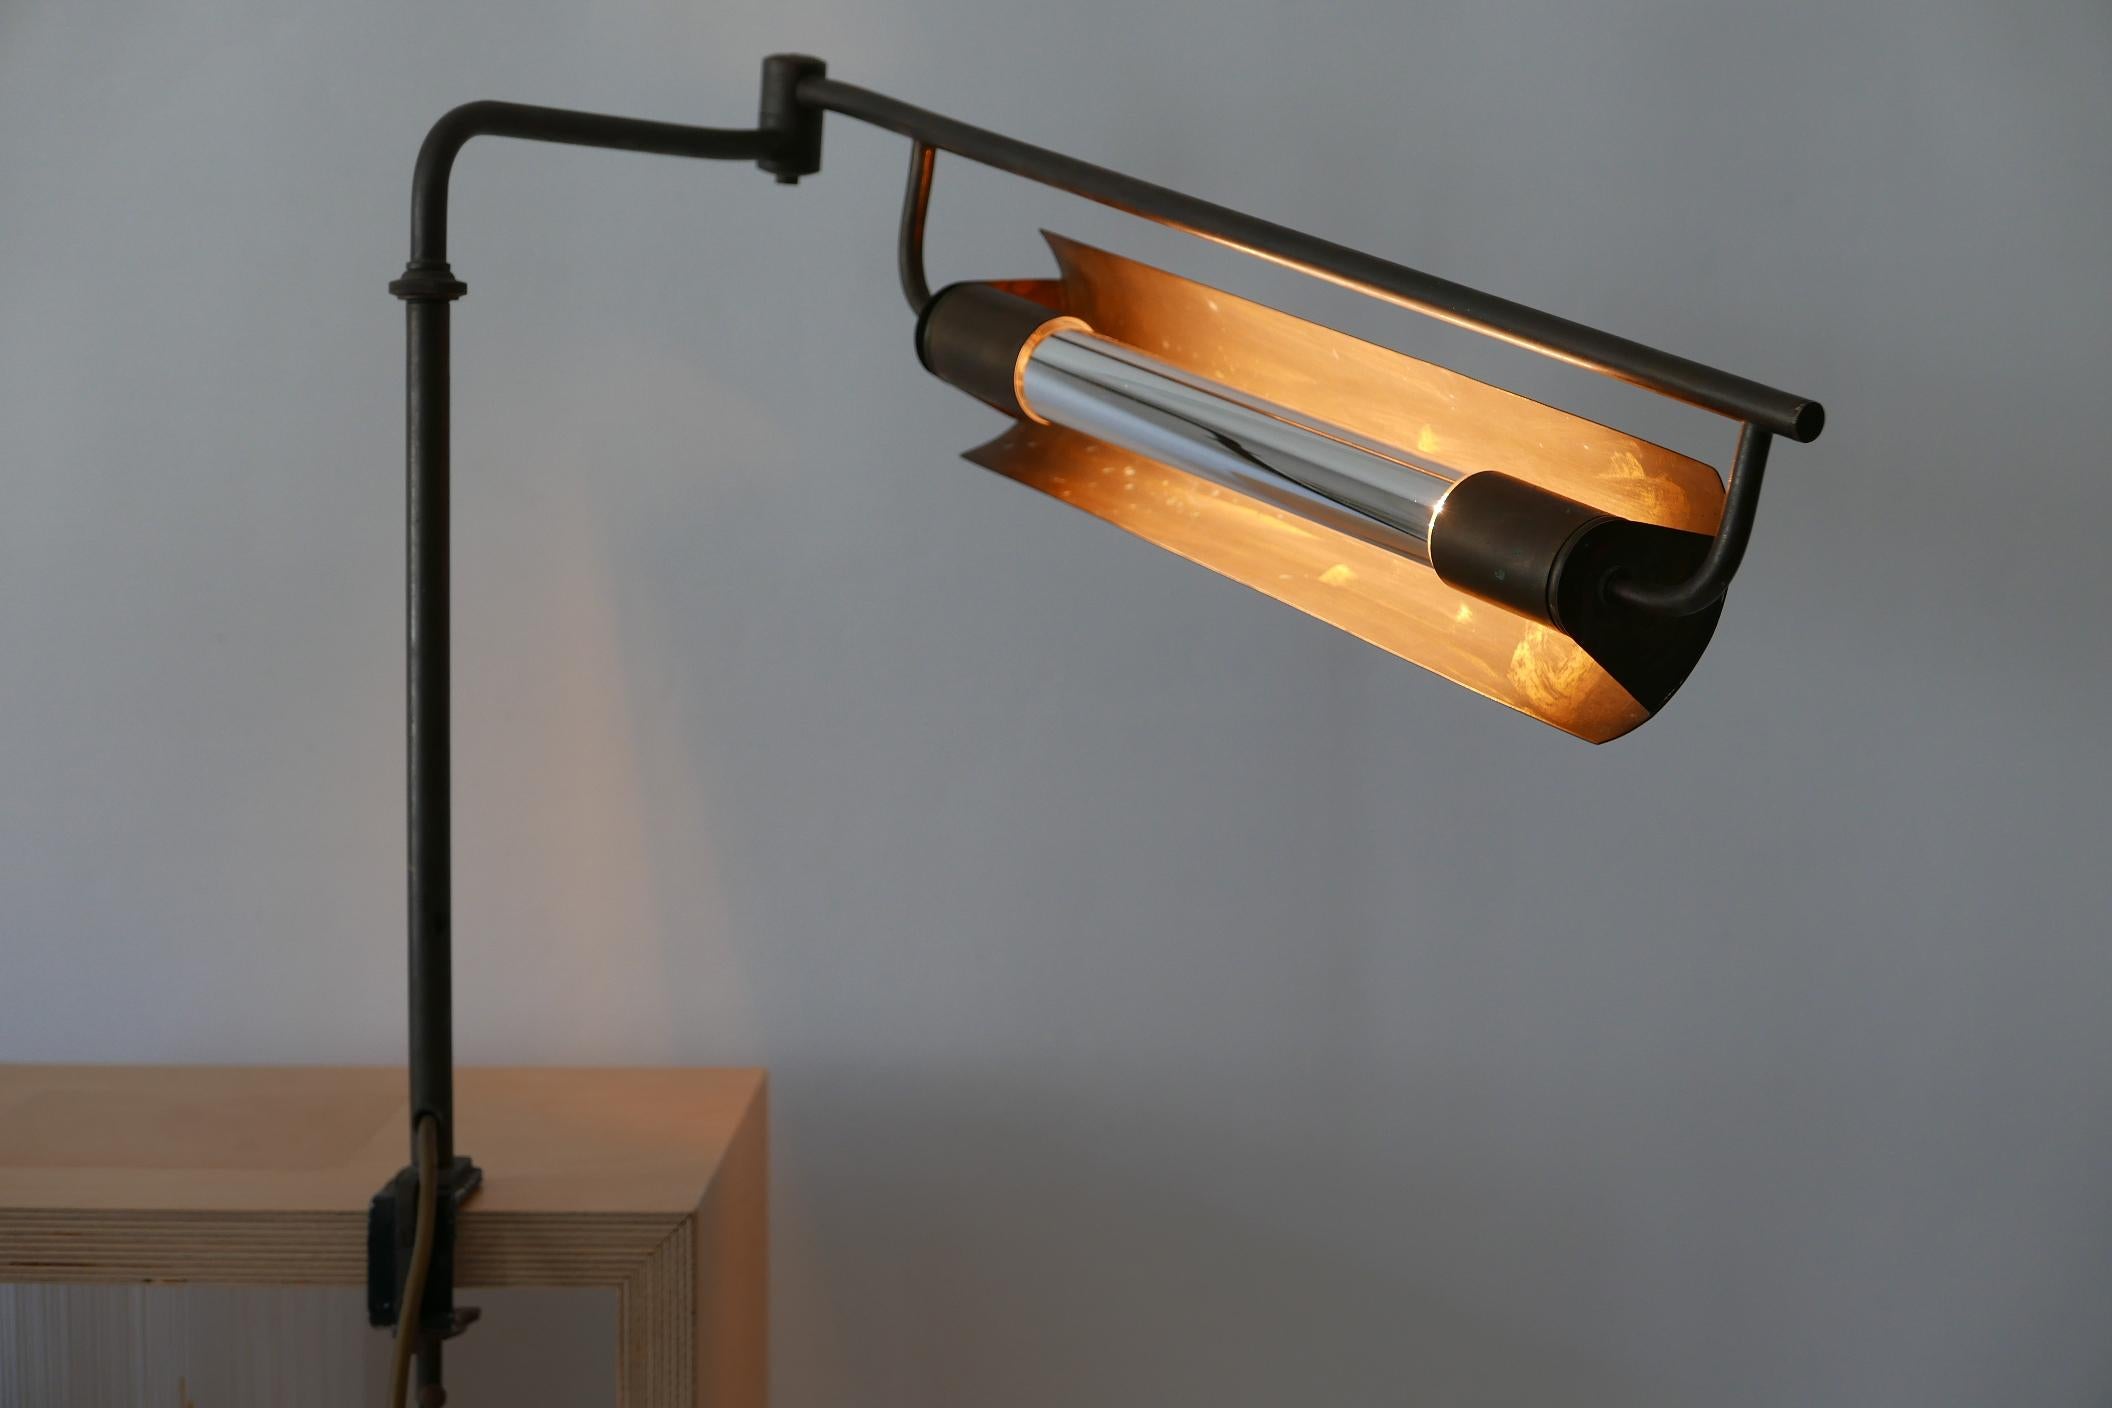 Exceptional Modernist Bauhaus Articulated Brass Clamp Table Lamp, Germany, 1930s For Sale 6